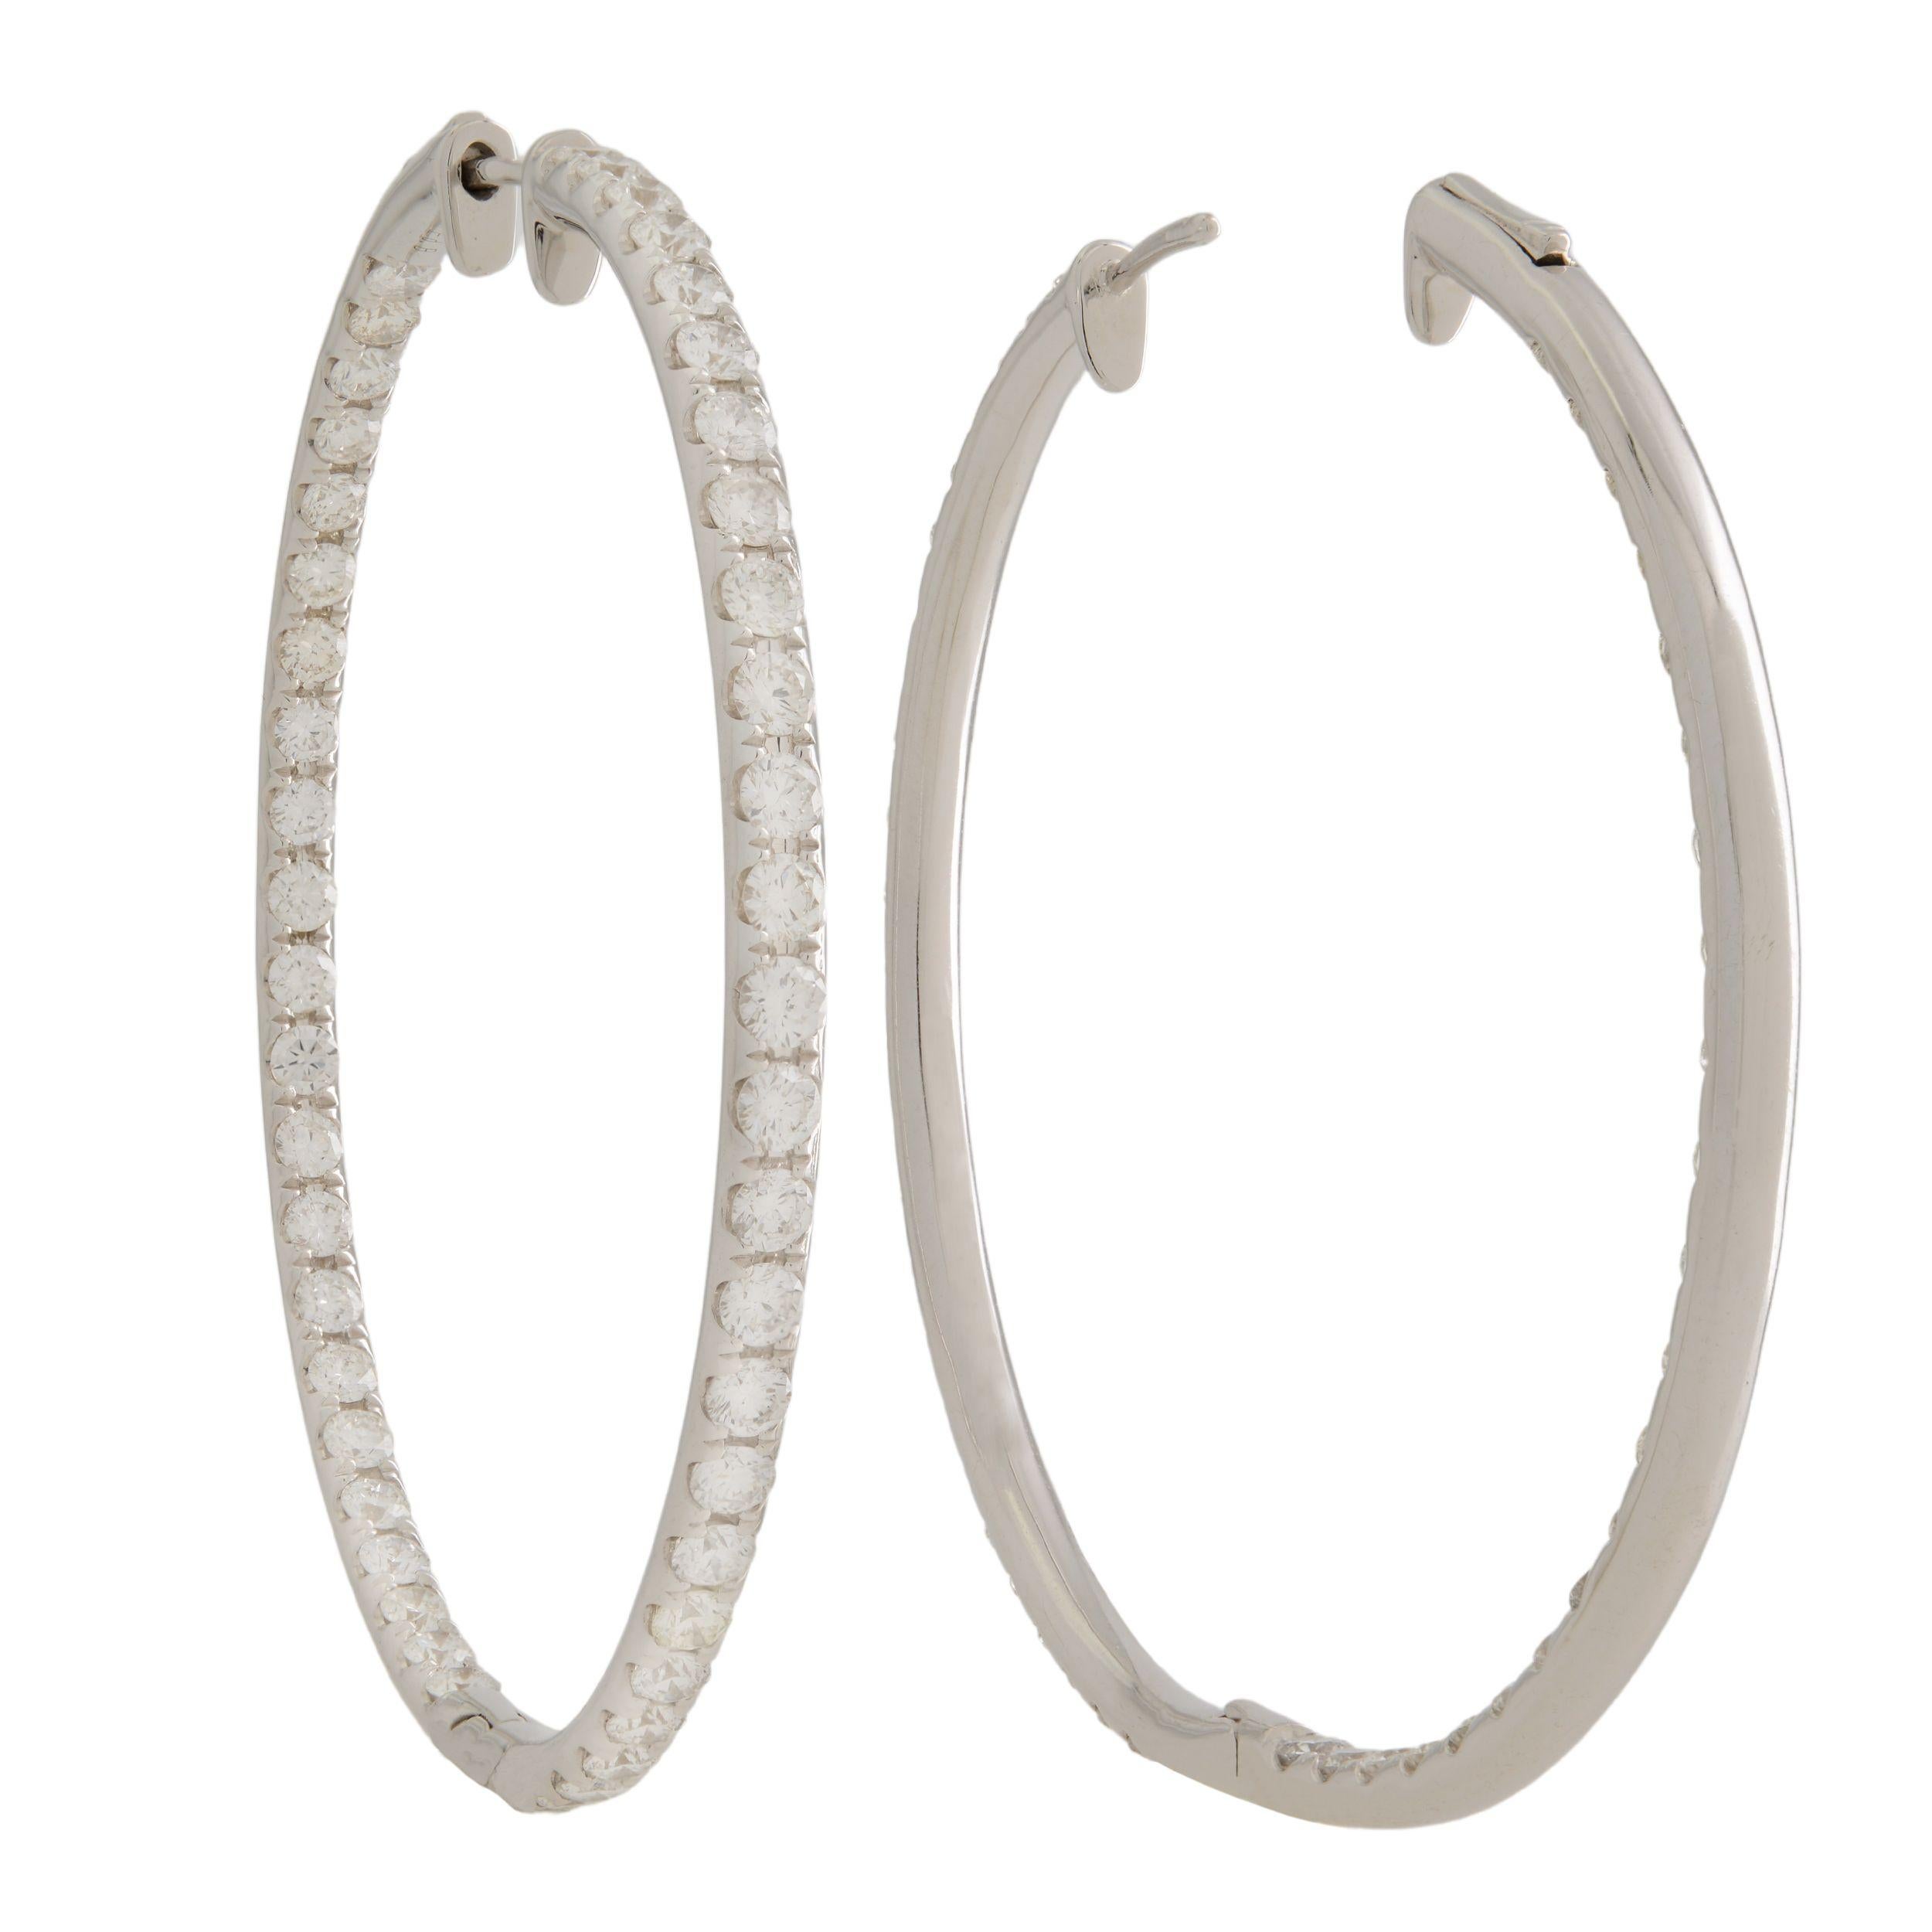 A very beautiful pair of Estate inside-out diamond medium hoop earrings. Each earring is crafted in 18K white gold which are lined with sparkling round cut pave set diamonds. The stones line only half of the outer hoop and half of the inner hoop.